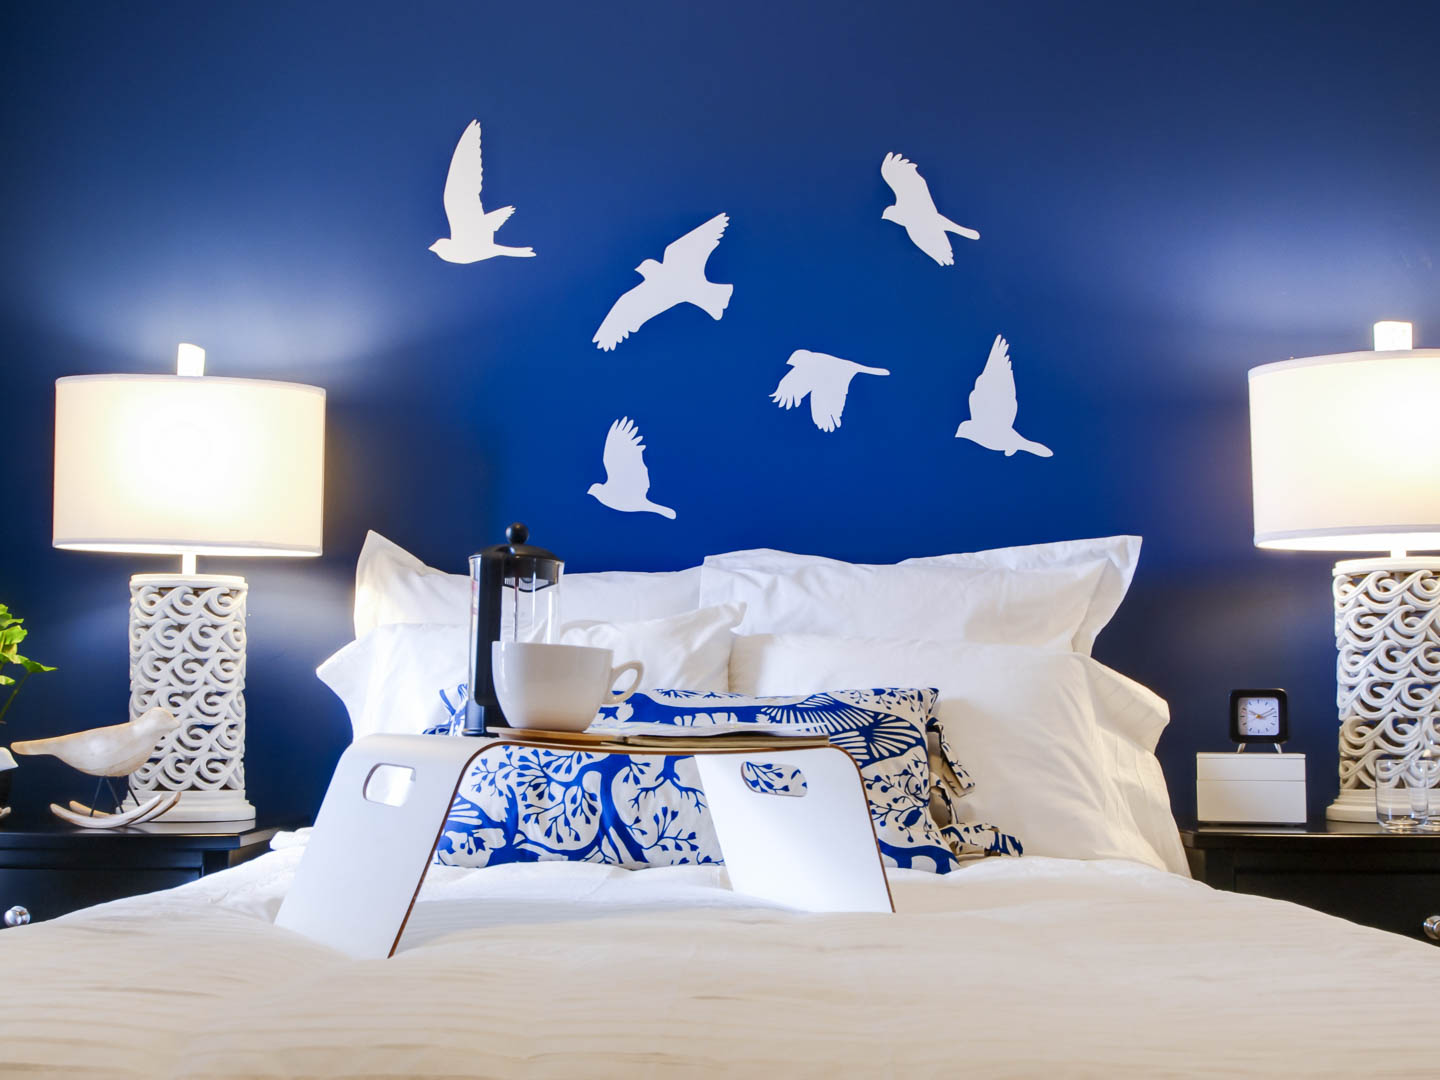 Bedroom with royal blue walls and crisp white bedding and lamps